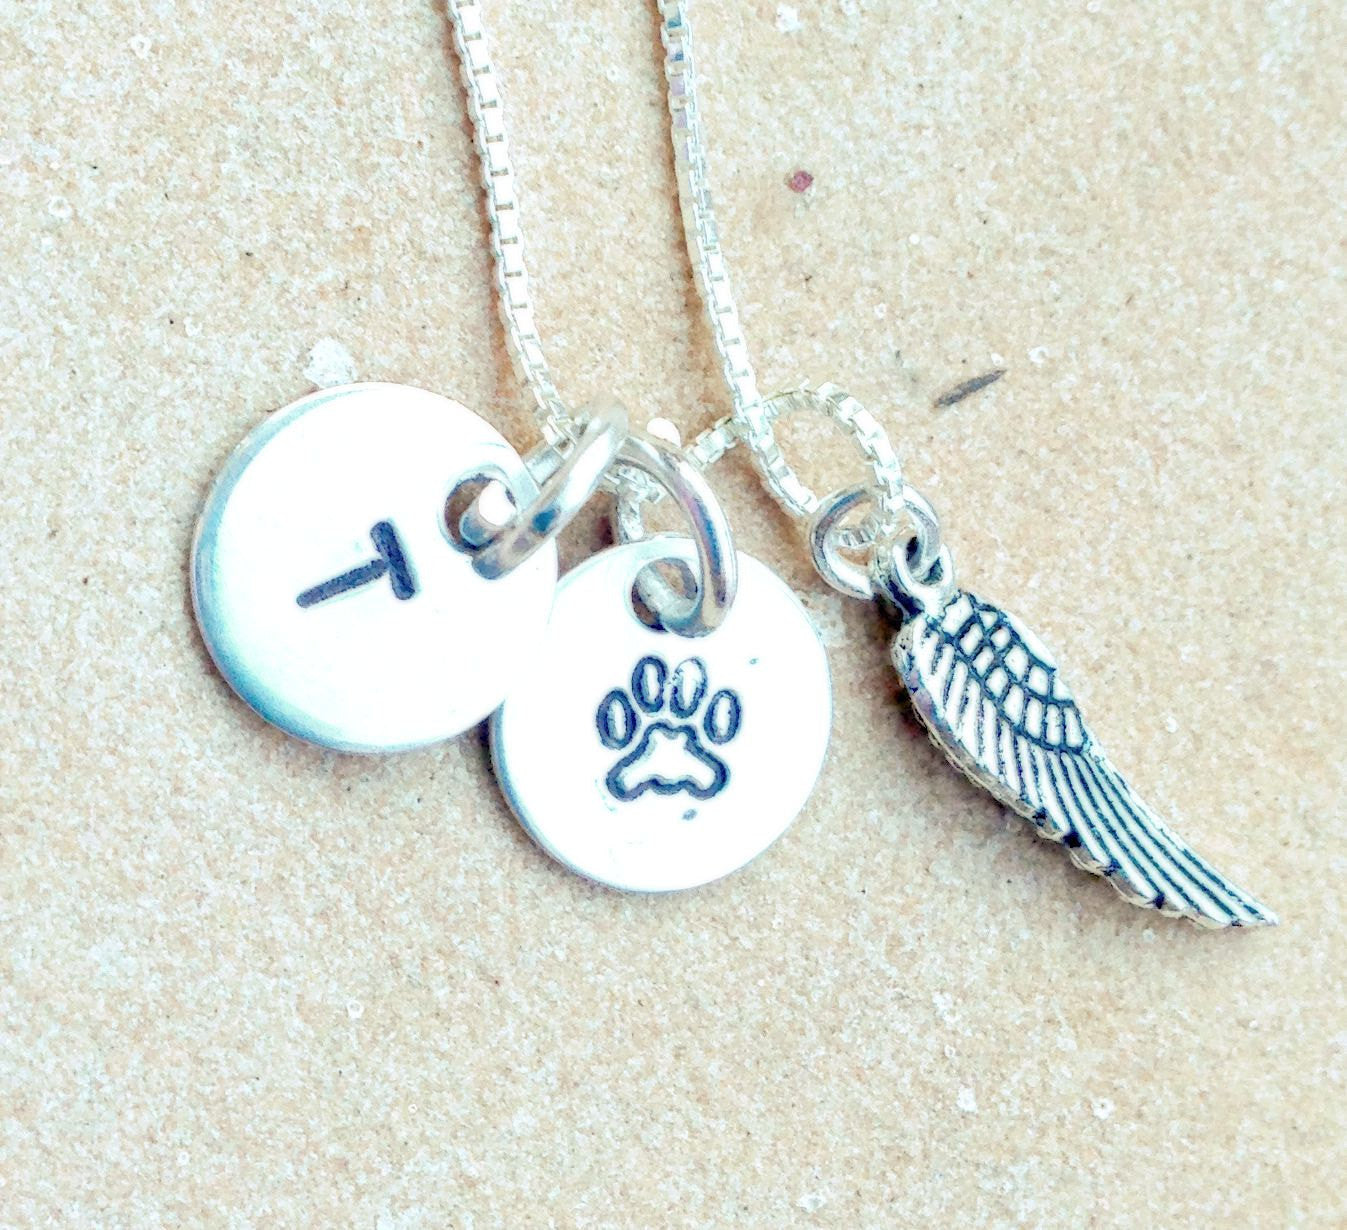 pet necklace, dog necklace, pet initial,  pet remembrance necklace, dog memorial necklace, pet love necklace, personalized pet necklace - Natashaaloha, jewelry, bracelets, necklace, keychains, fishing lures, gifts for men, charms, personalized, 